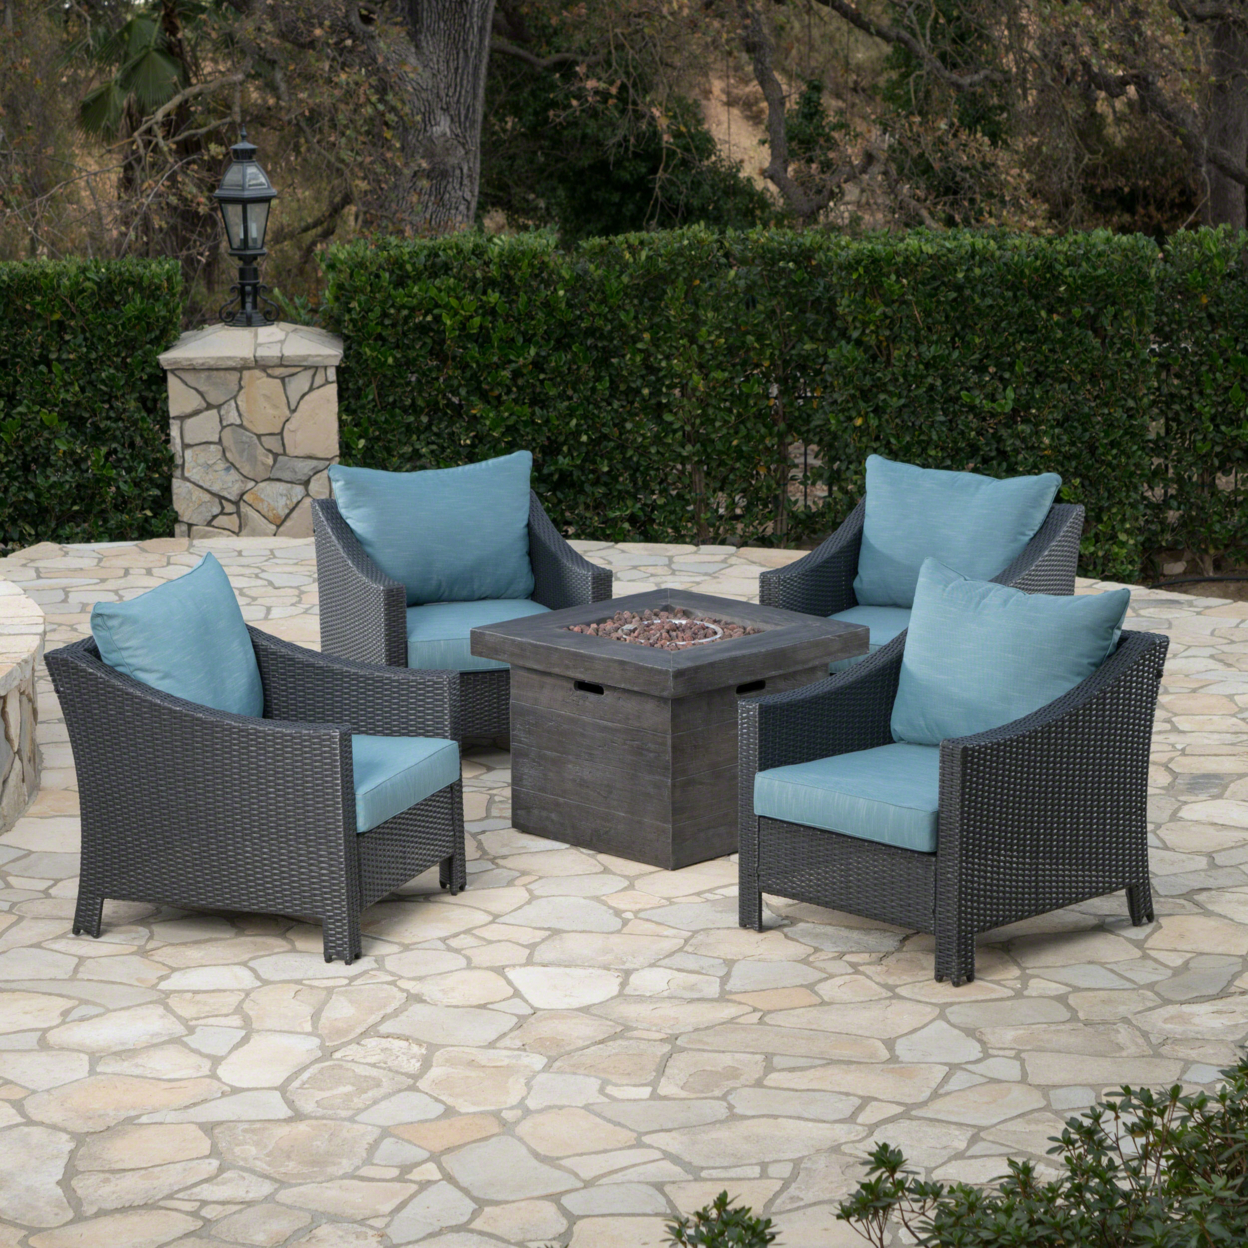 Andrew Outdoor 5 Piece Wicker Water Resistant Cushion Chat Set With Fire Pit - Beige